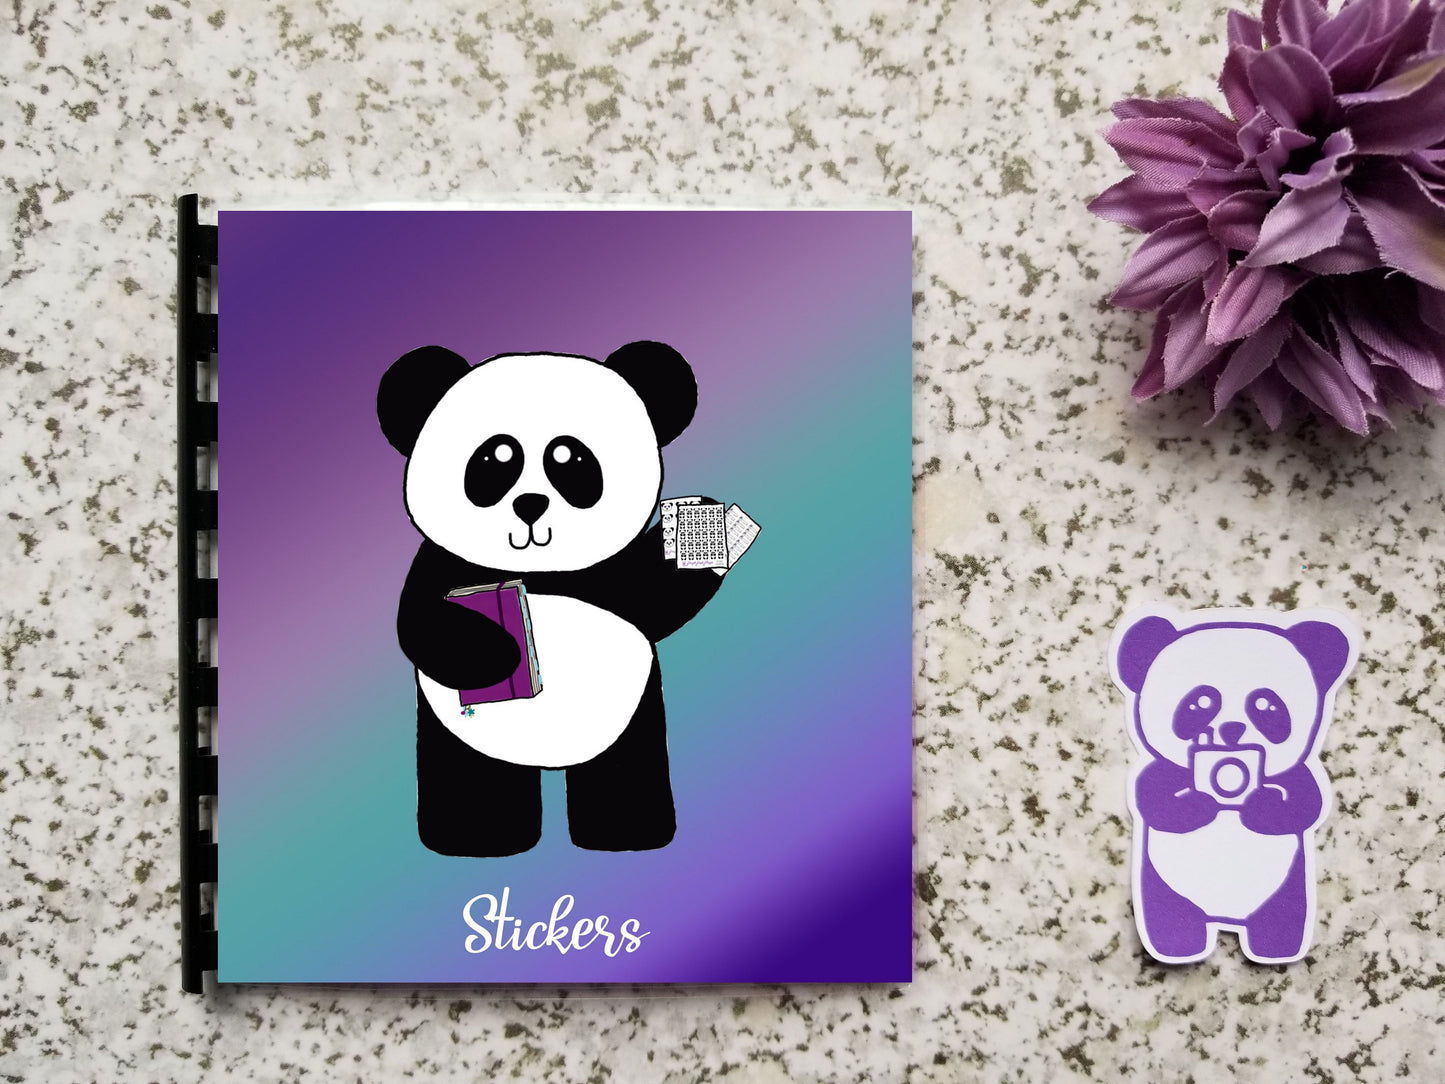 Reusable Sticker Storage Book Album - Purple Teal Ombre Gradient Panda Ready to Plan Hand Drawn Cover